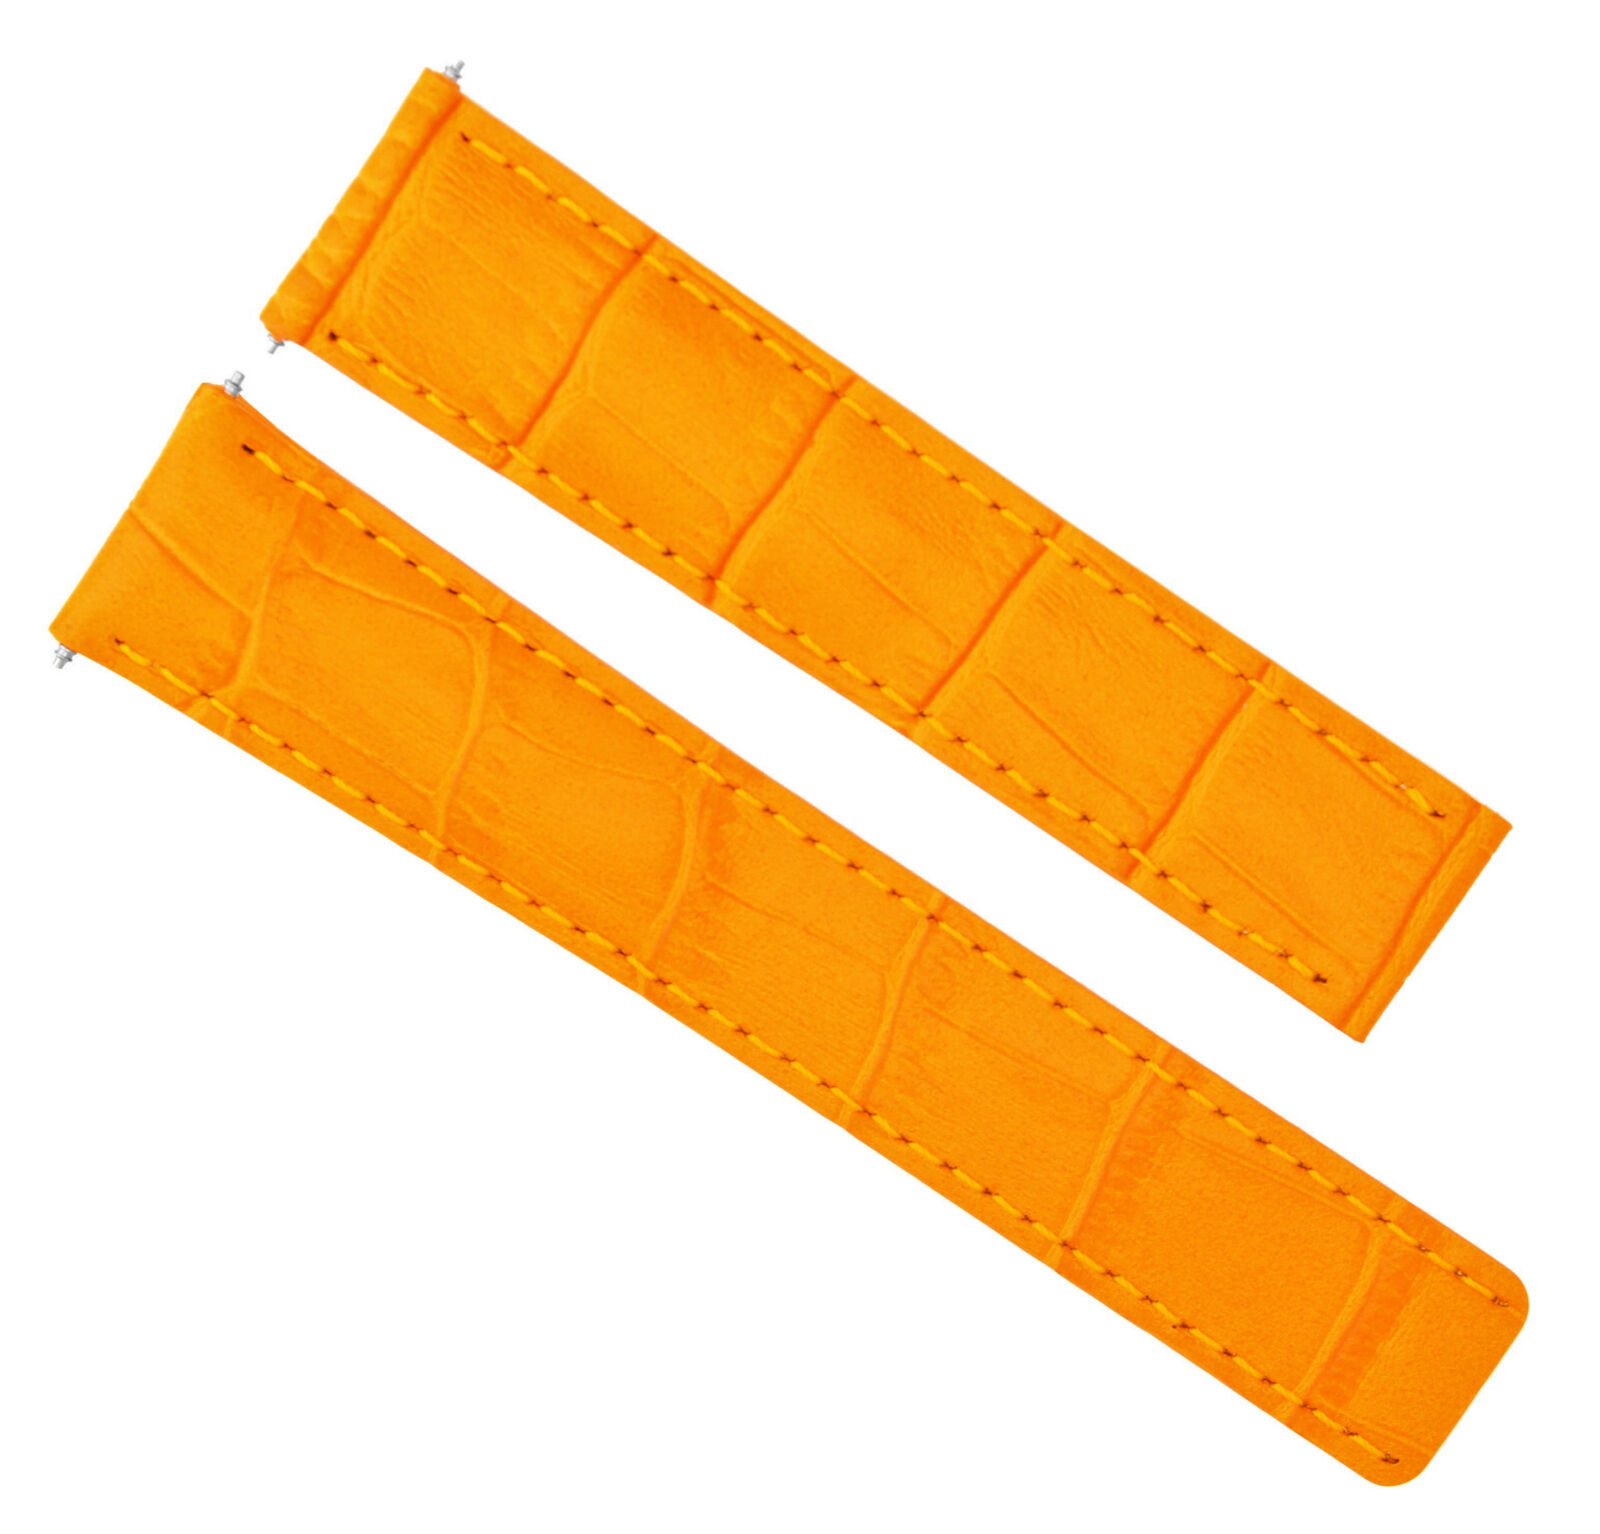 18MM LEATHER BAND WATCH STRAP FIT BREITLING DEPLOYMENT CLASP 18/16  ORANGE #1C